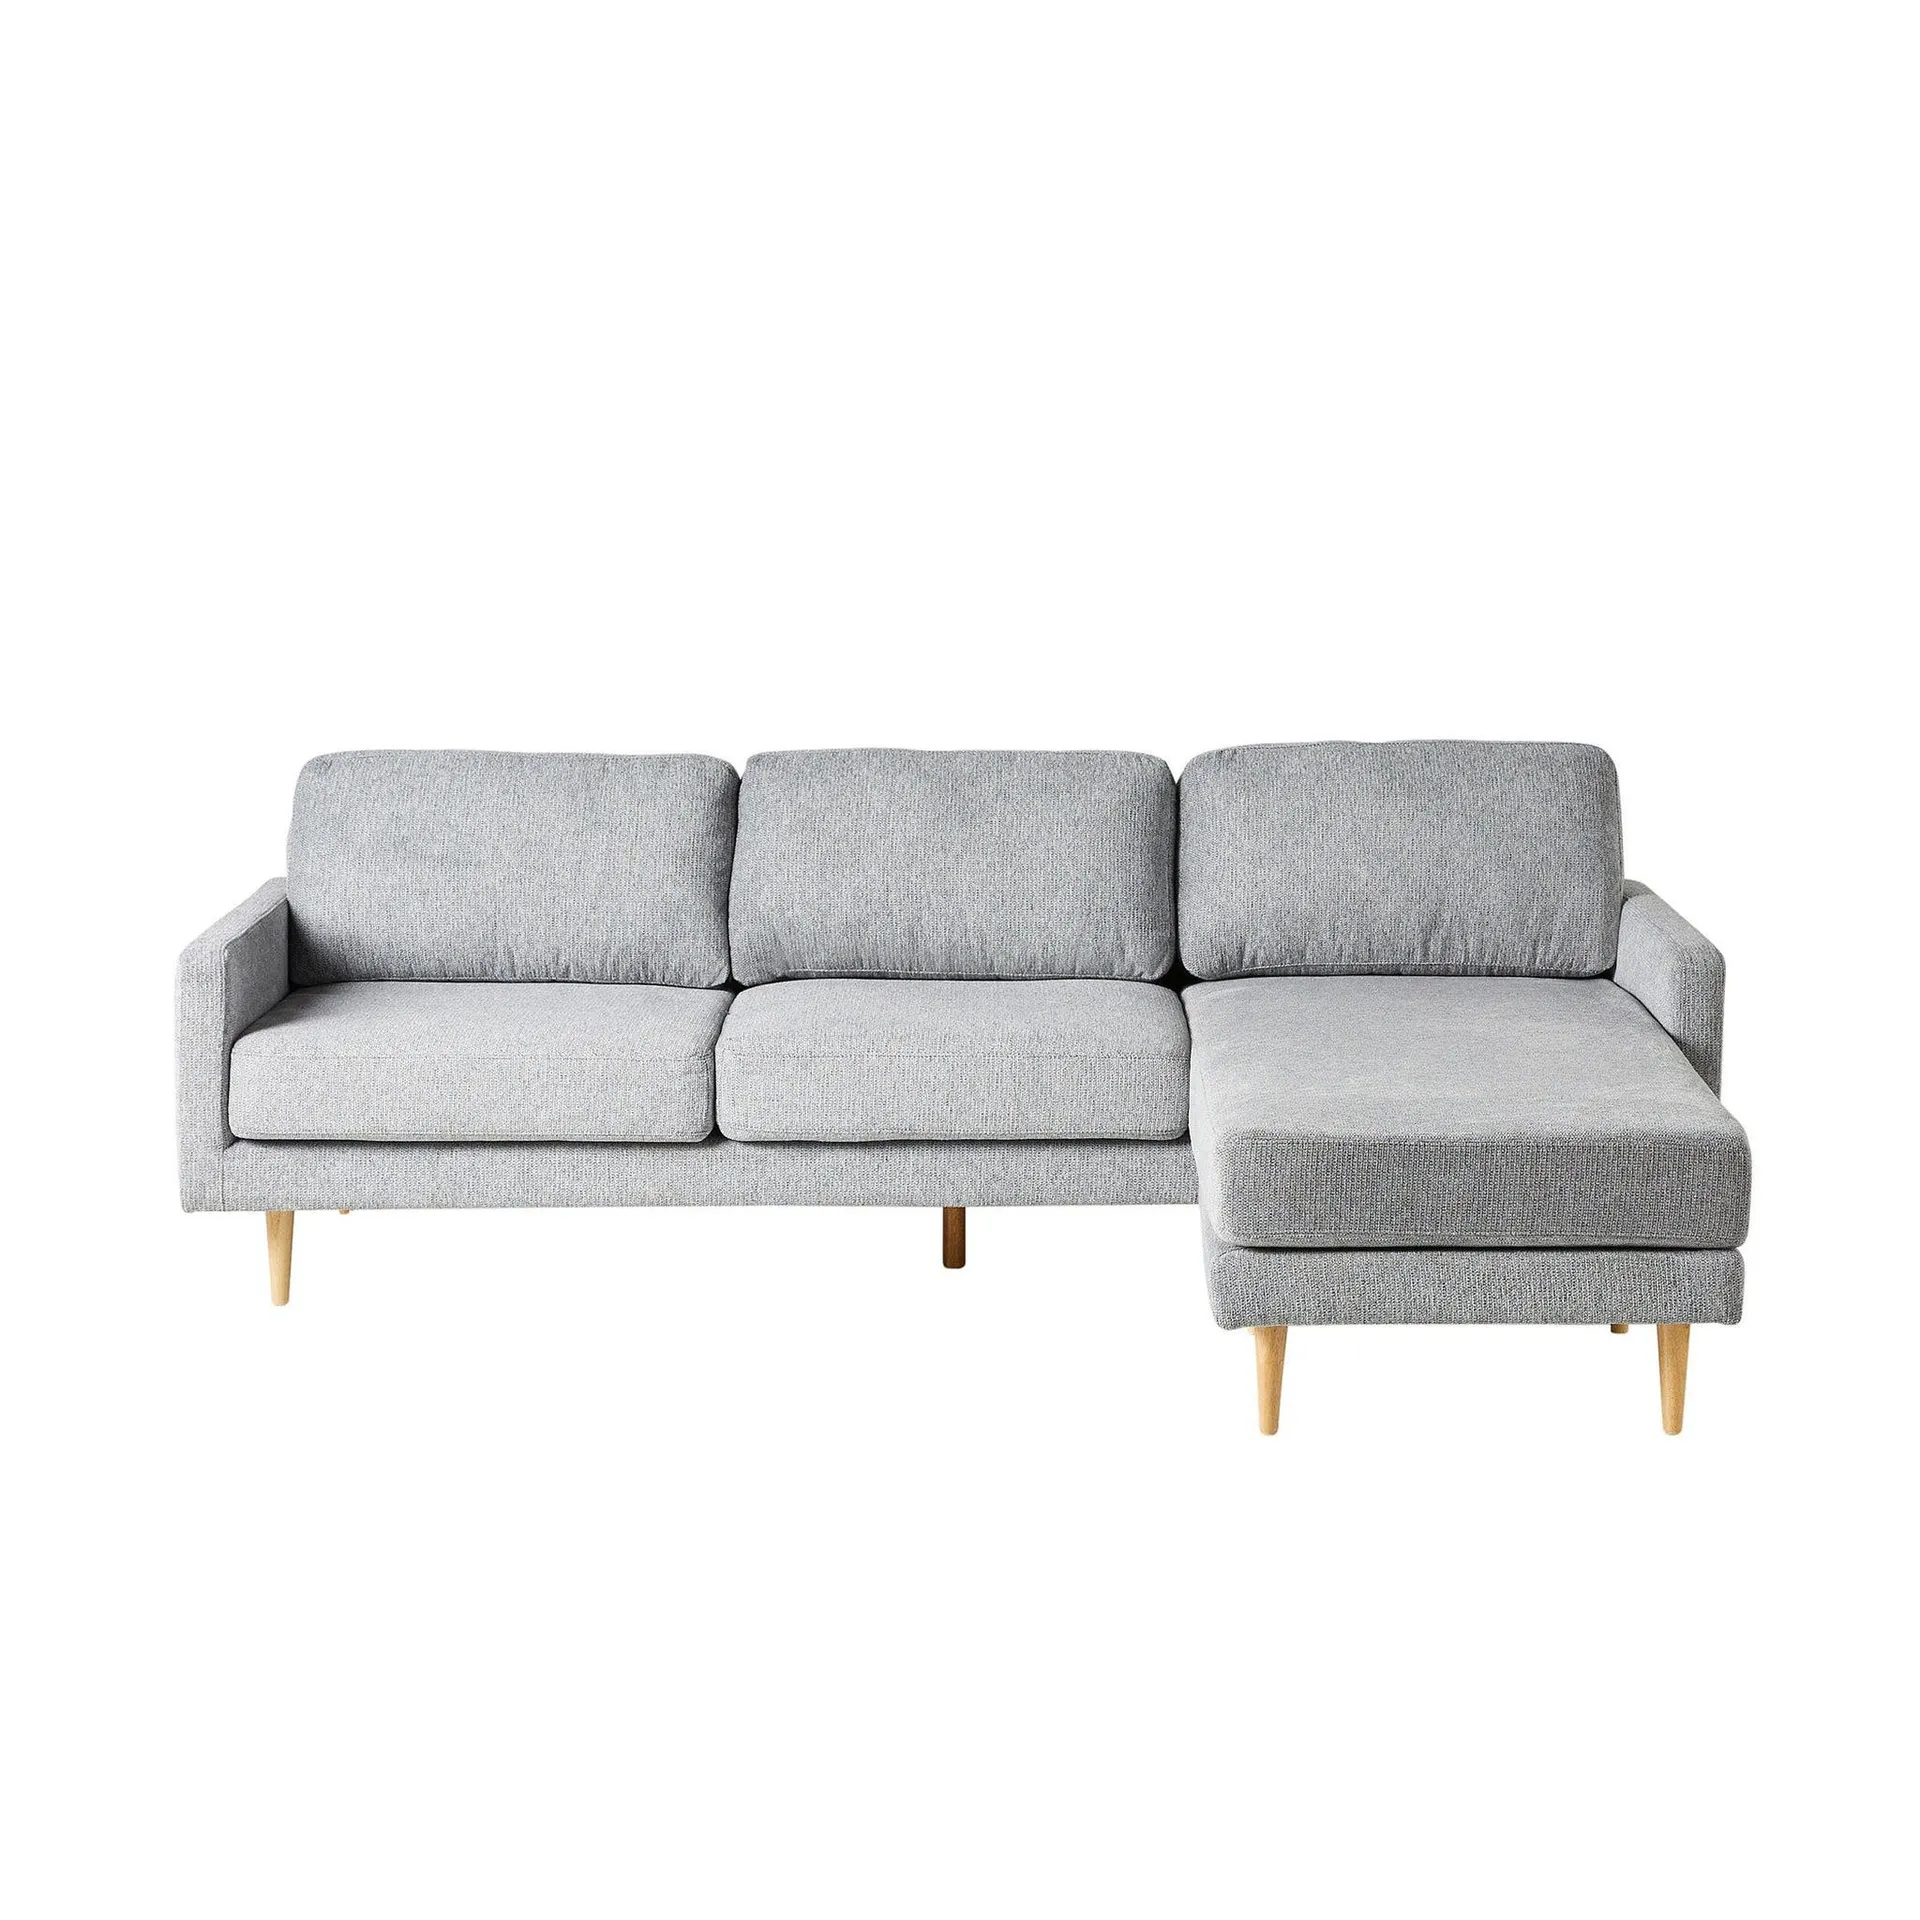 Boden 3 Seater Sofa with Reversible Chaise Grey